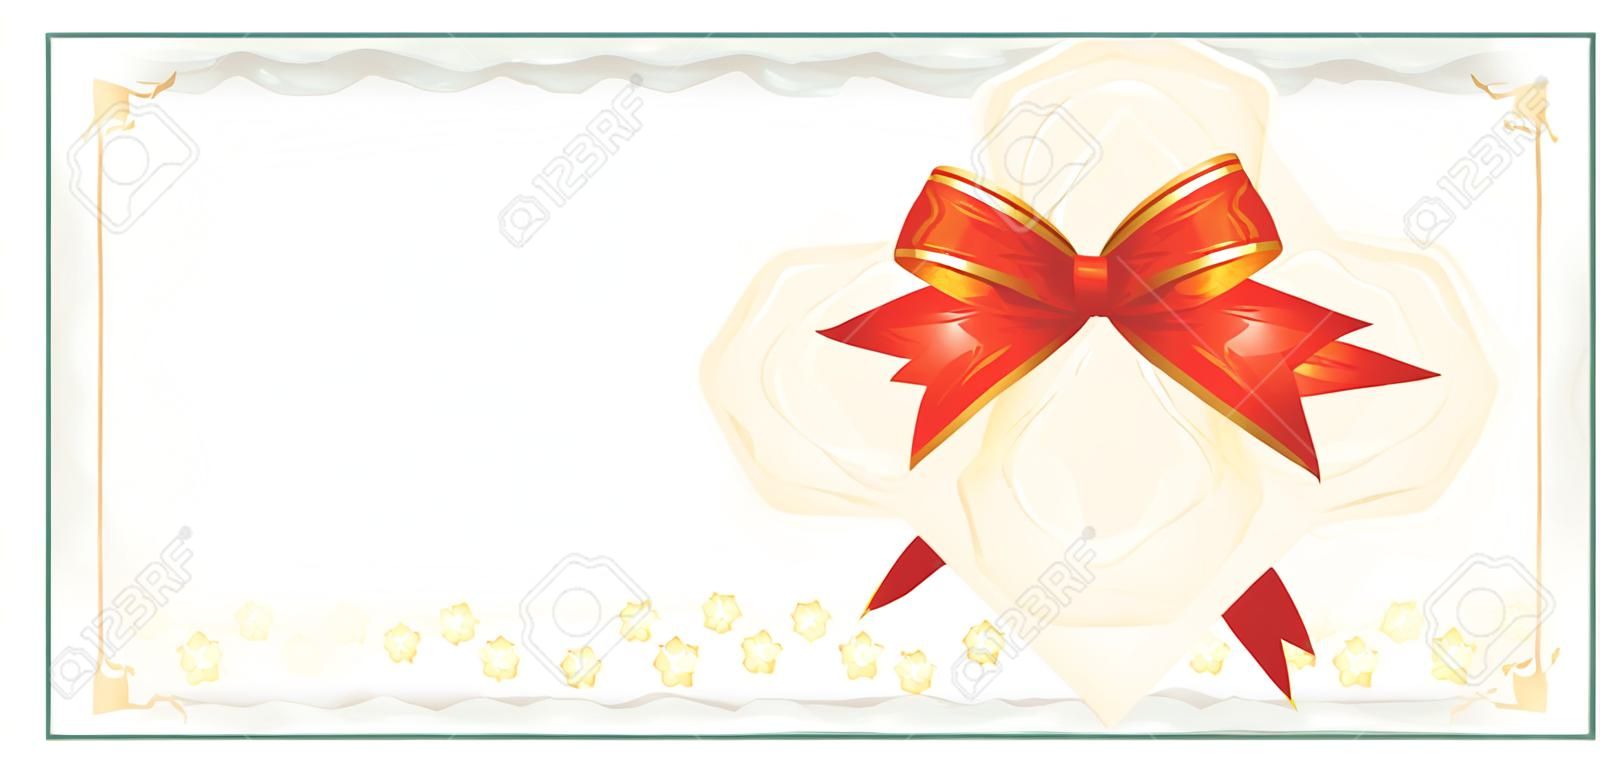 Golden Gift Certificate or Discount Coupon template 